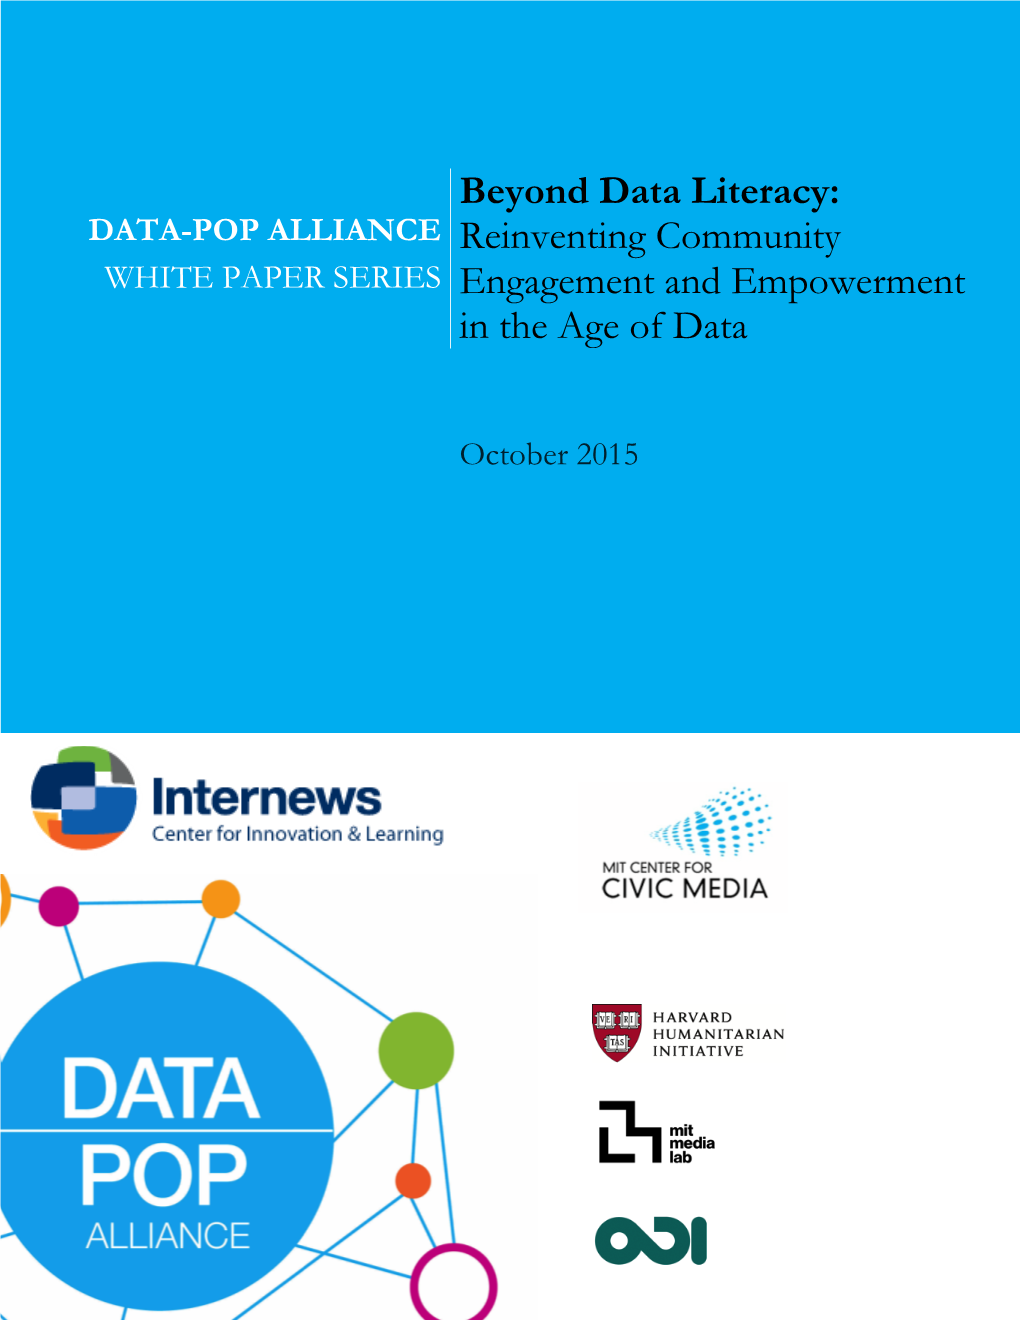 Beyond Data Literacy: Reinventing Community Engagement and Empowerment in the Age of Data.” Data-Pop Alliance White Paper Series